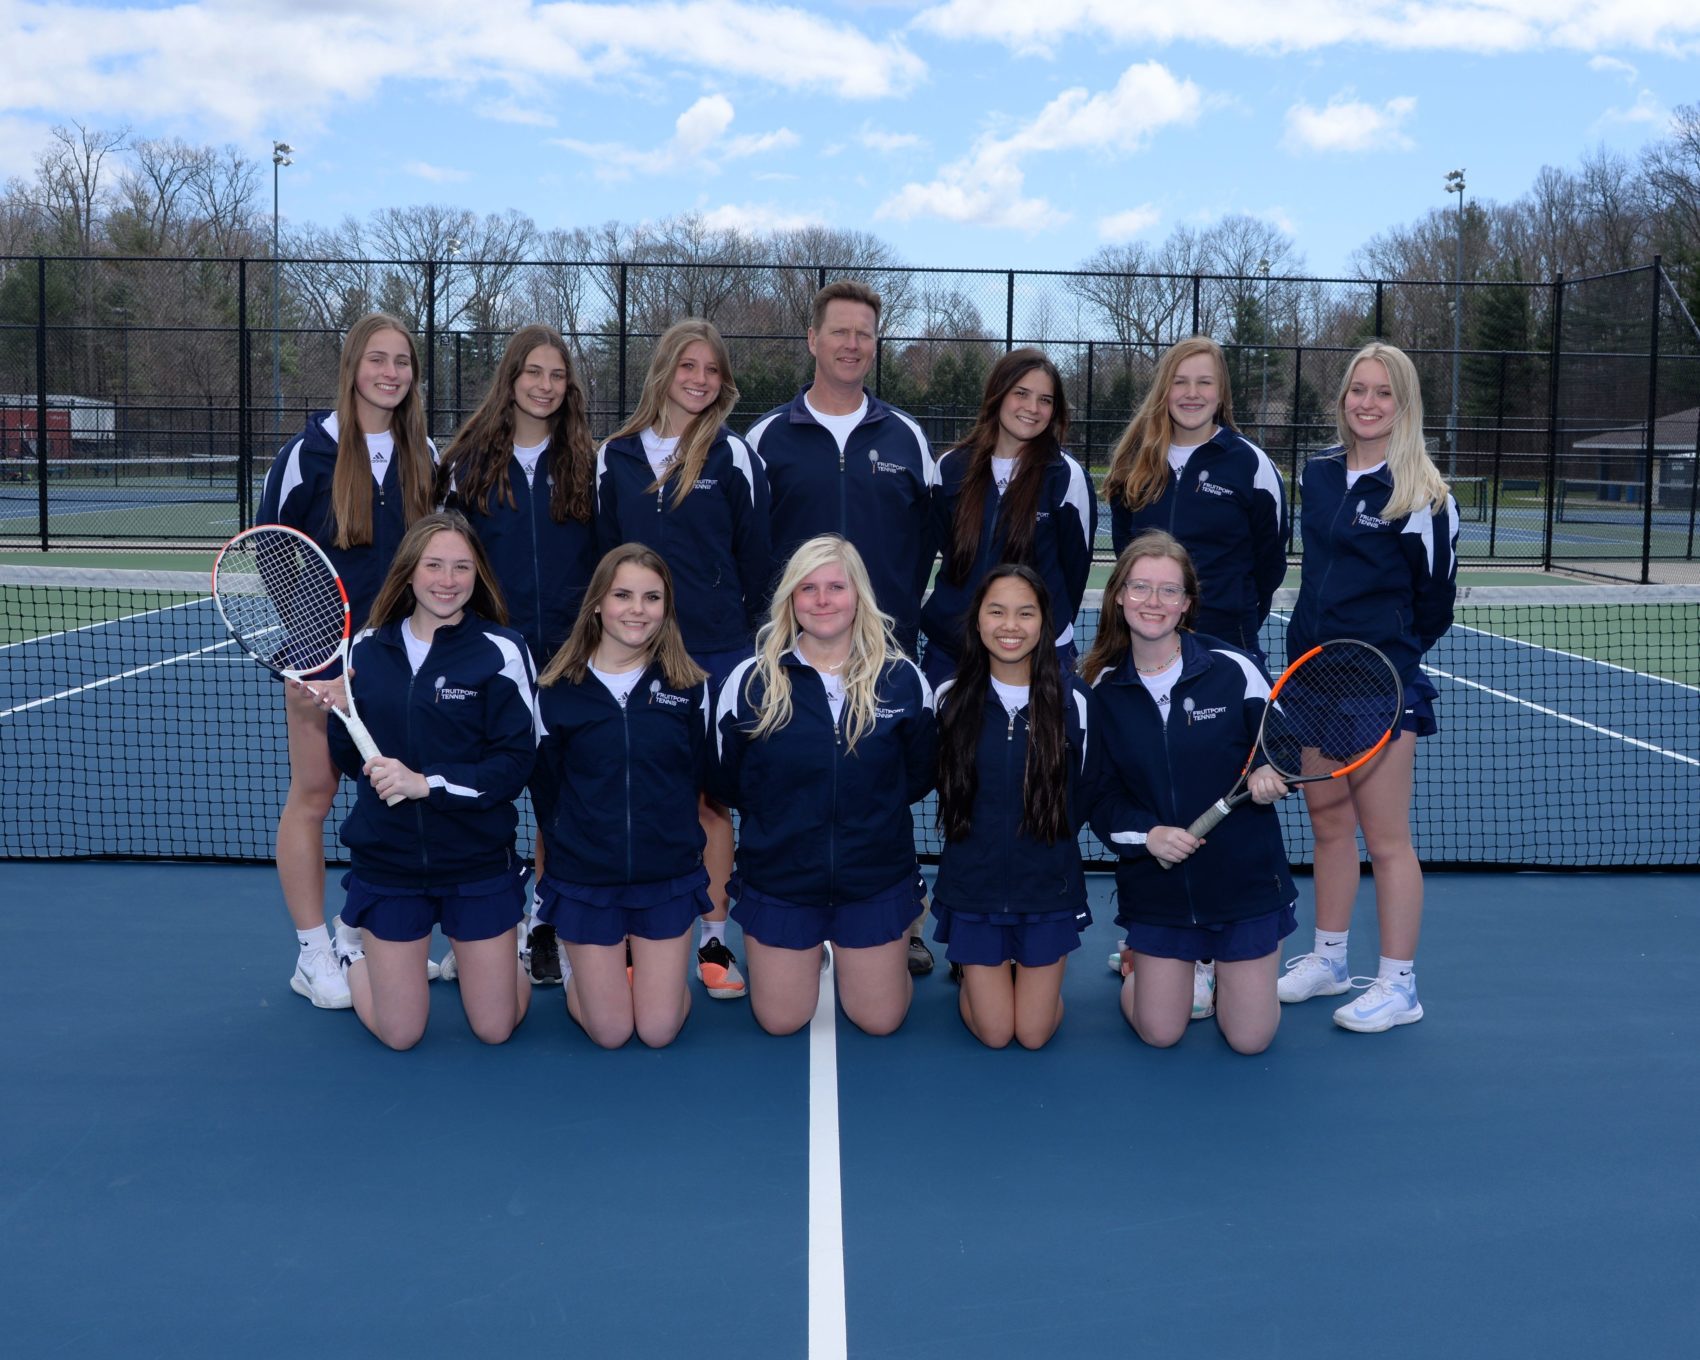 Fruitport tennis results from Monday afternoon